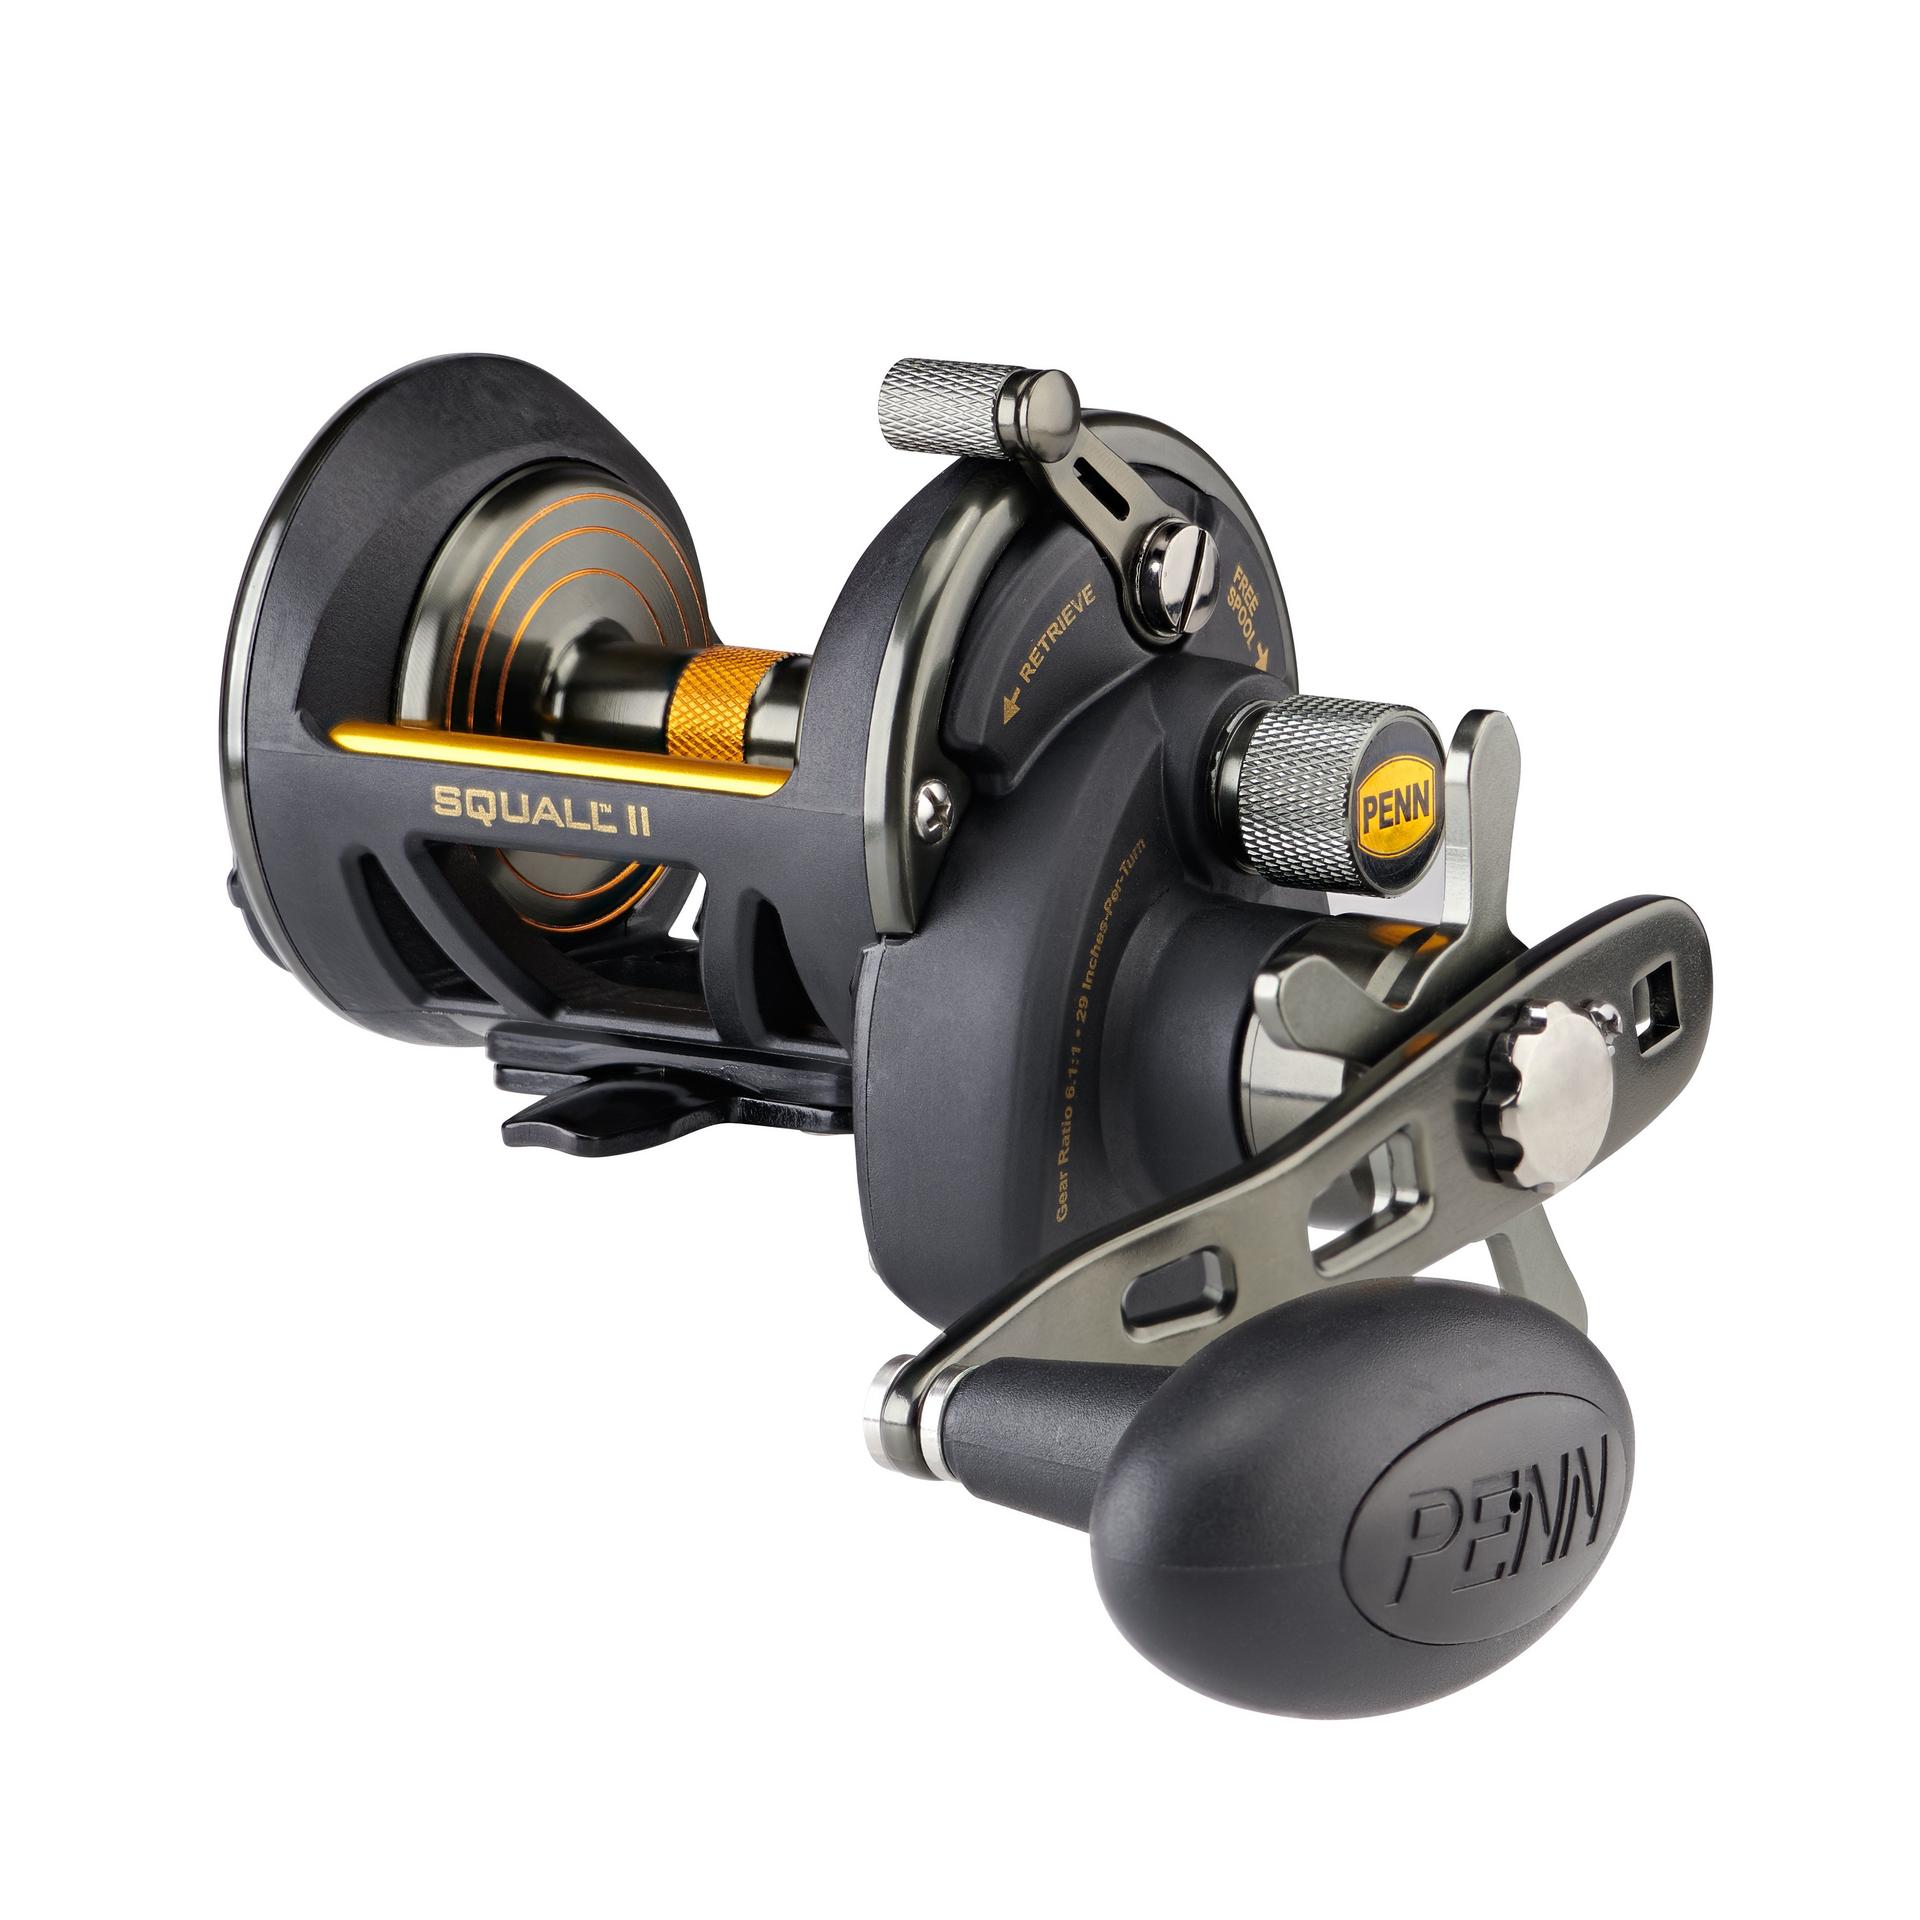 Squall® II Star Drag Conventional Reel